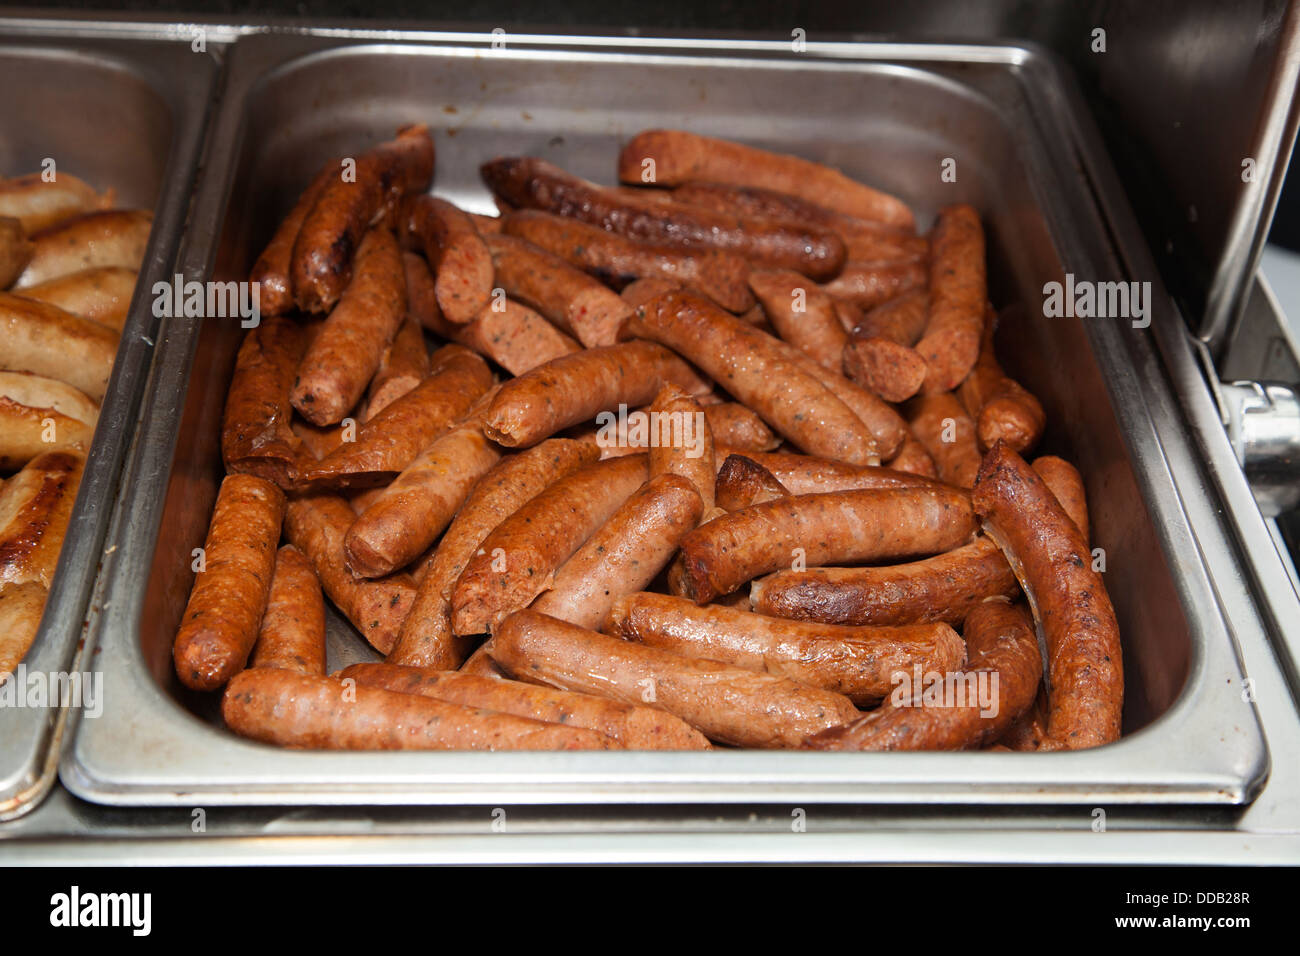 Cooked animal meat products beef cow pork chicken pieces slice portions on diplay Stock Photo